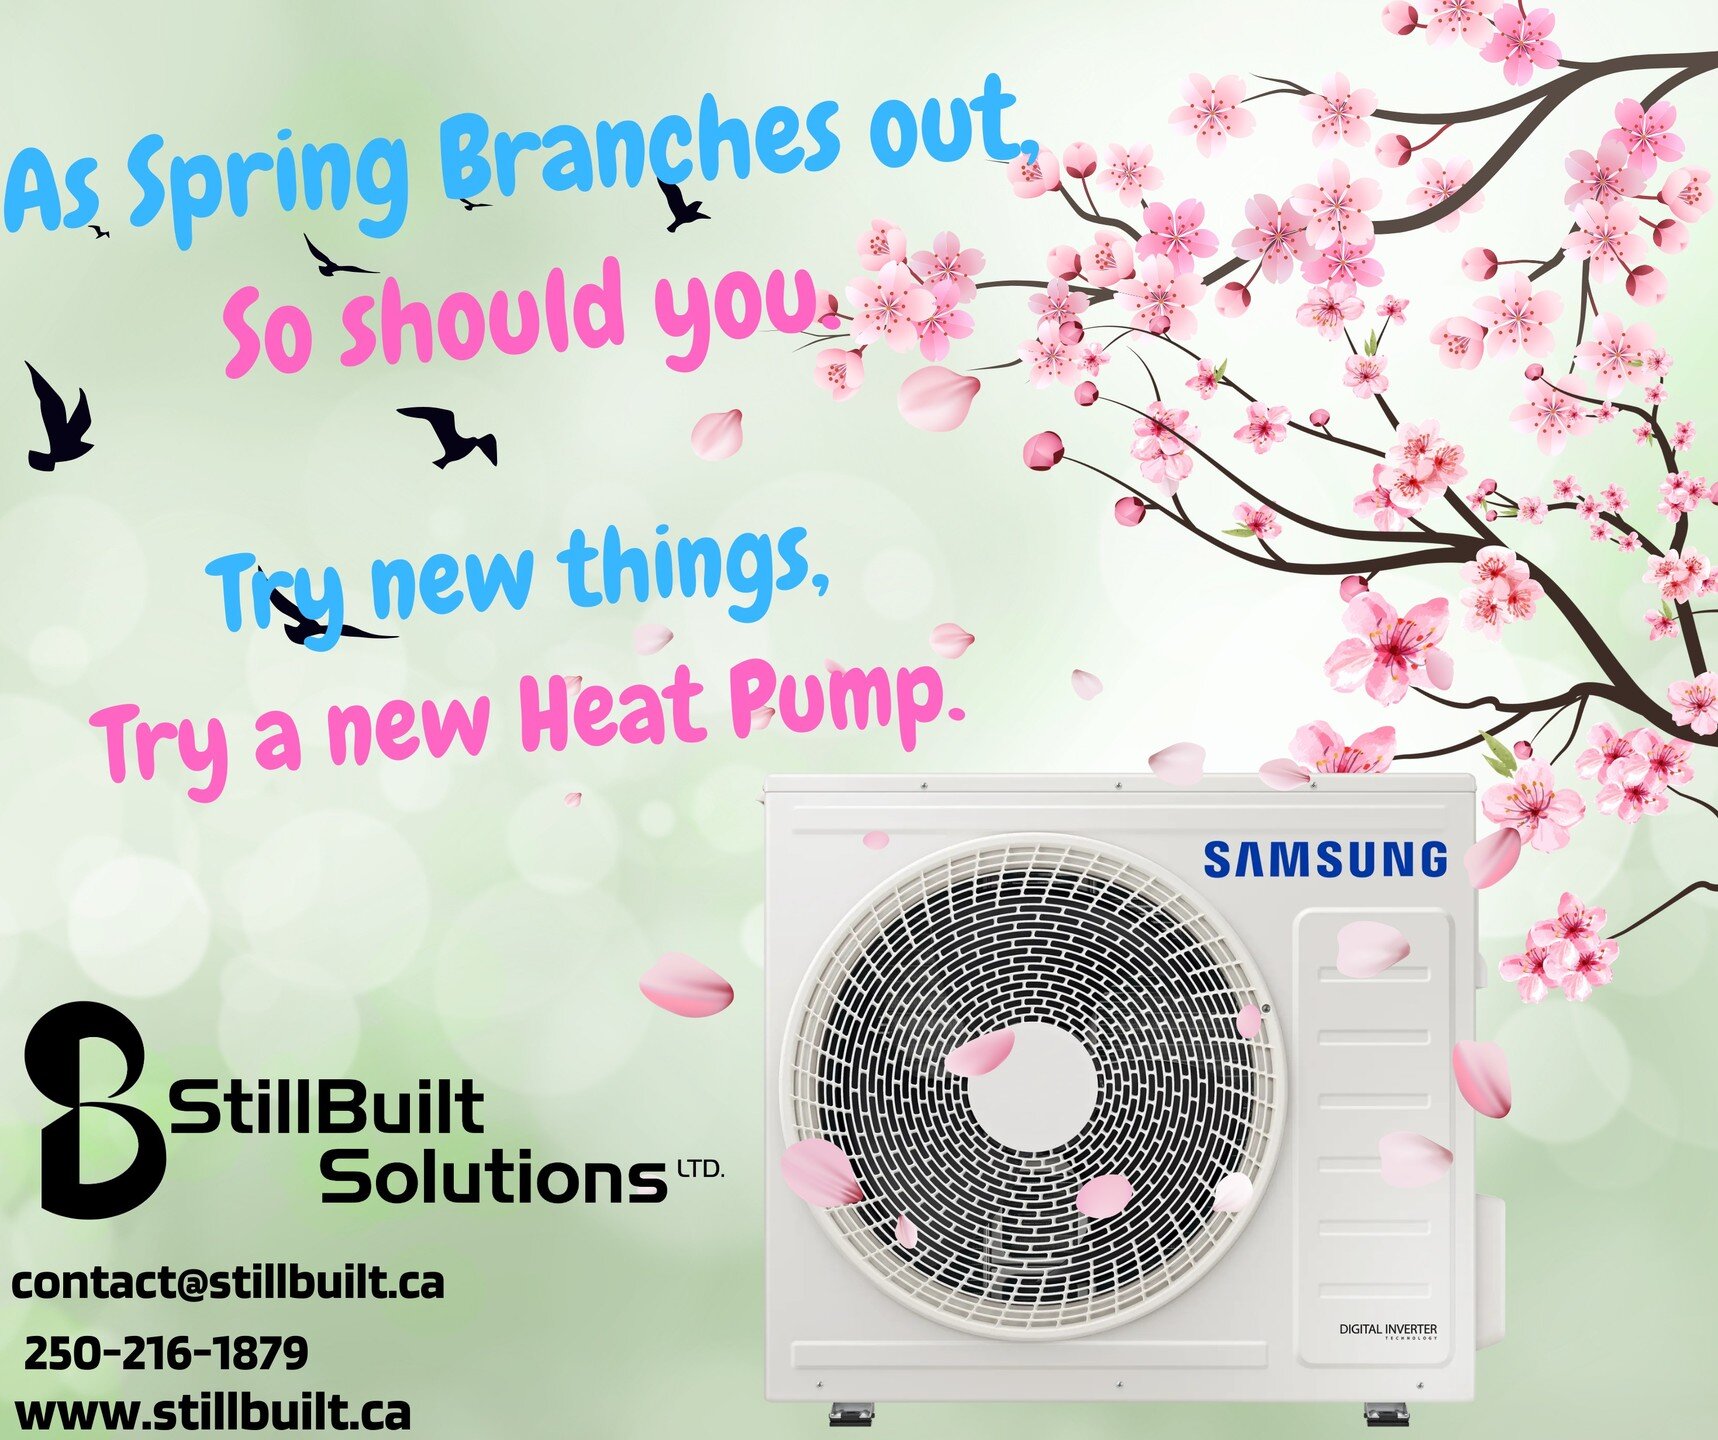 🌼🔥 Keep Cool This Spring with Our Heat Pump Installs! 🔥🌼

Stay comfortable as the temperatures rise. Fast, reliable heat pump installations from Stillbuilt Solutions. Beat the heat&mdash;call us today at 250-216-1879!

Your trusted partner for in